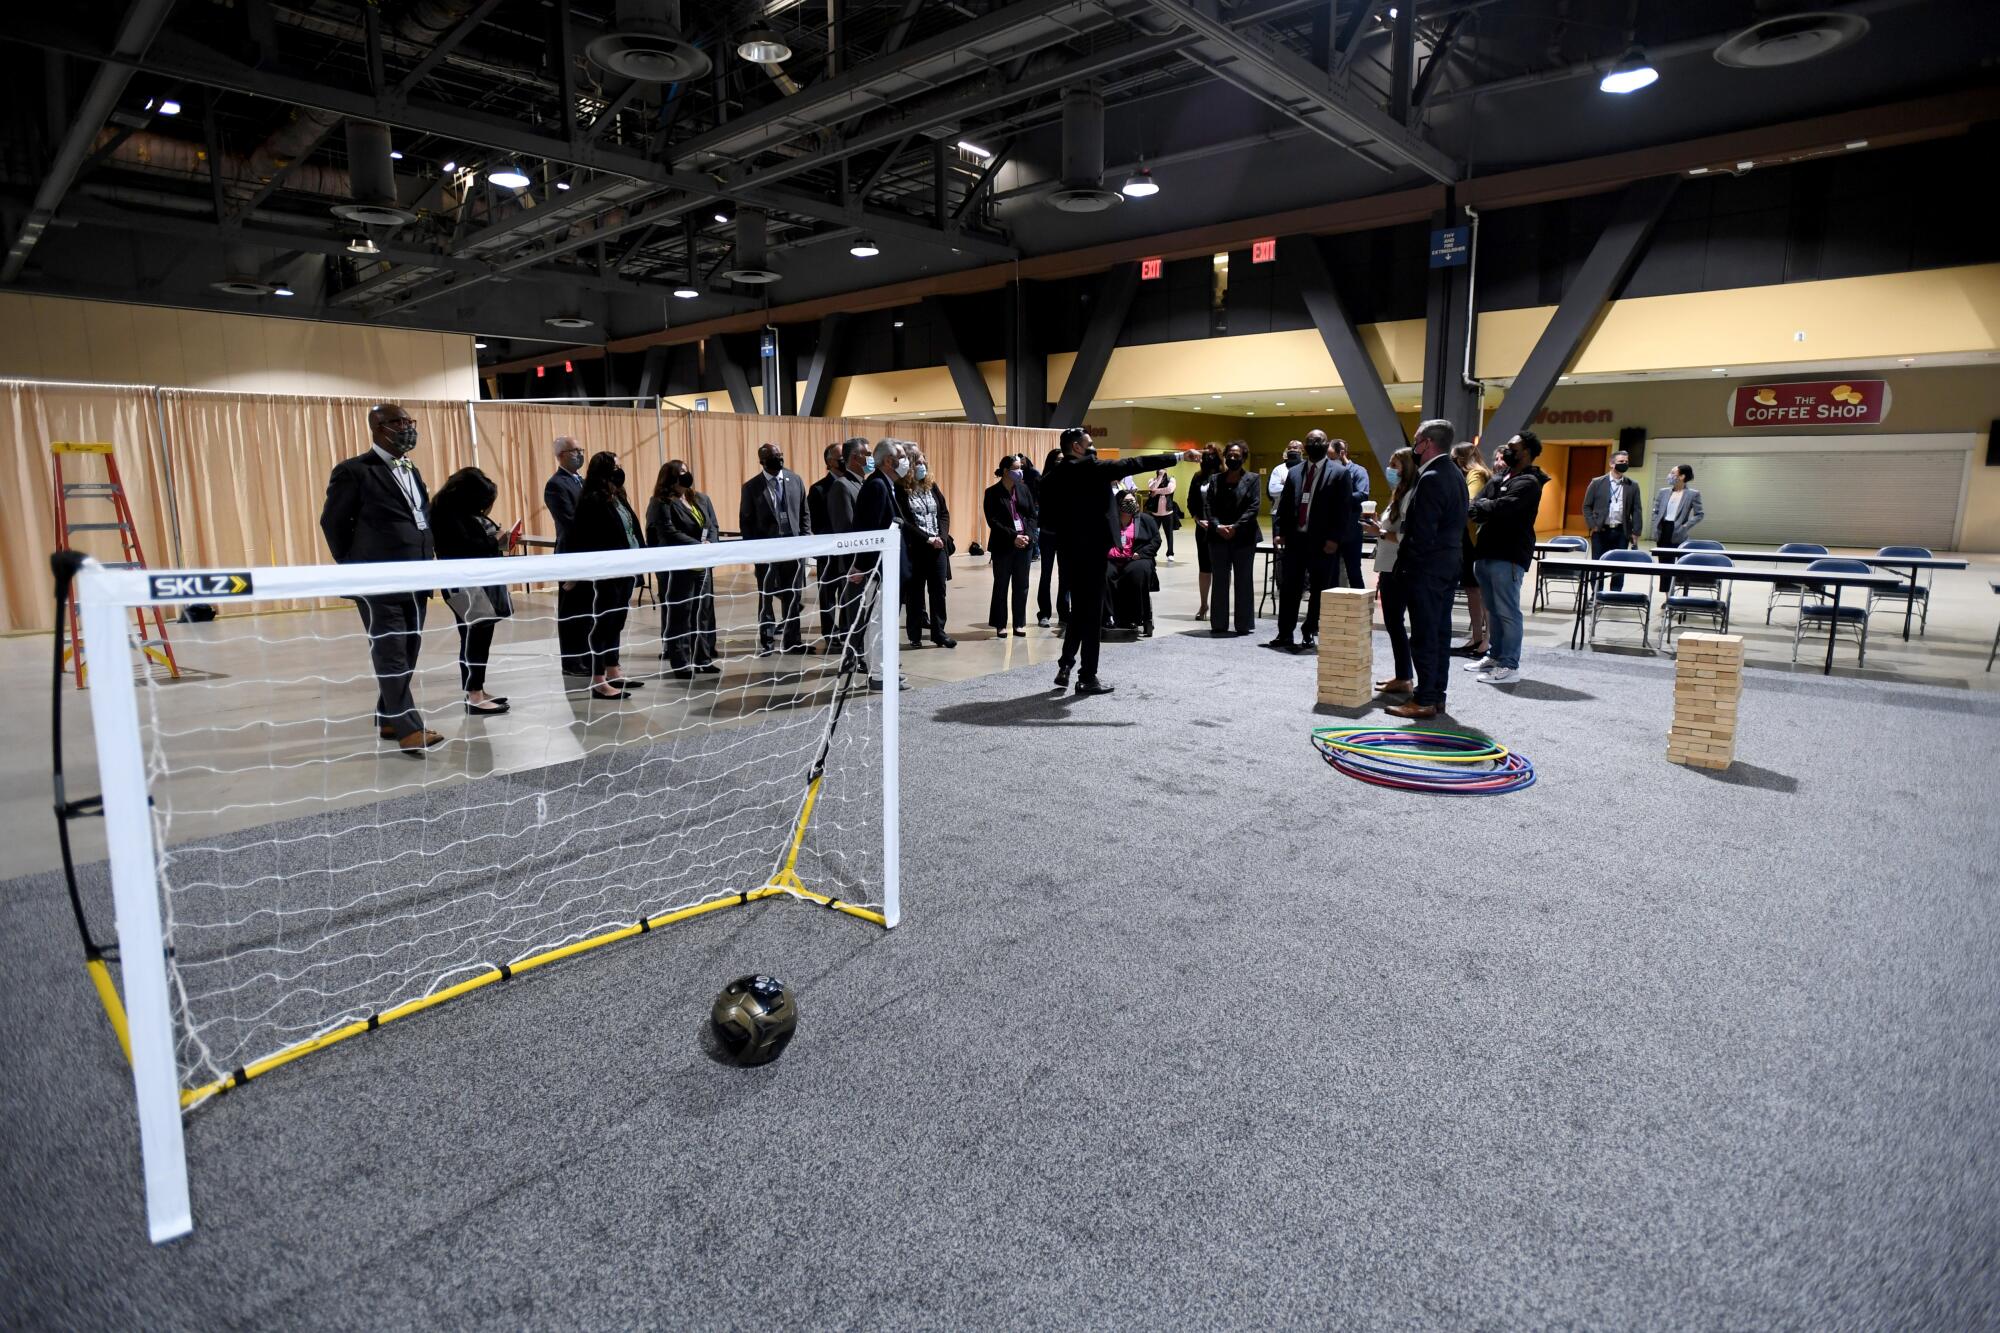 People stand in a recreation area with hula hoops, a soccer net and ball and tables.